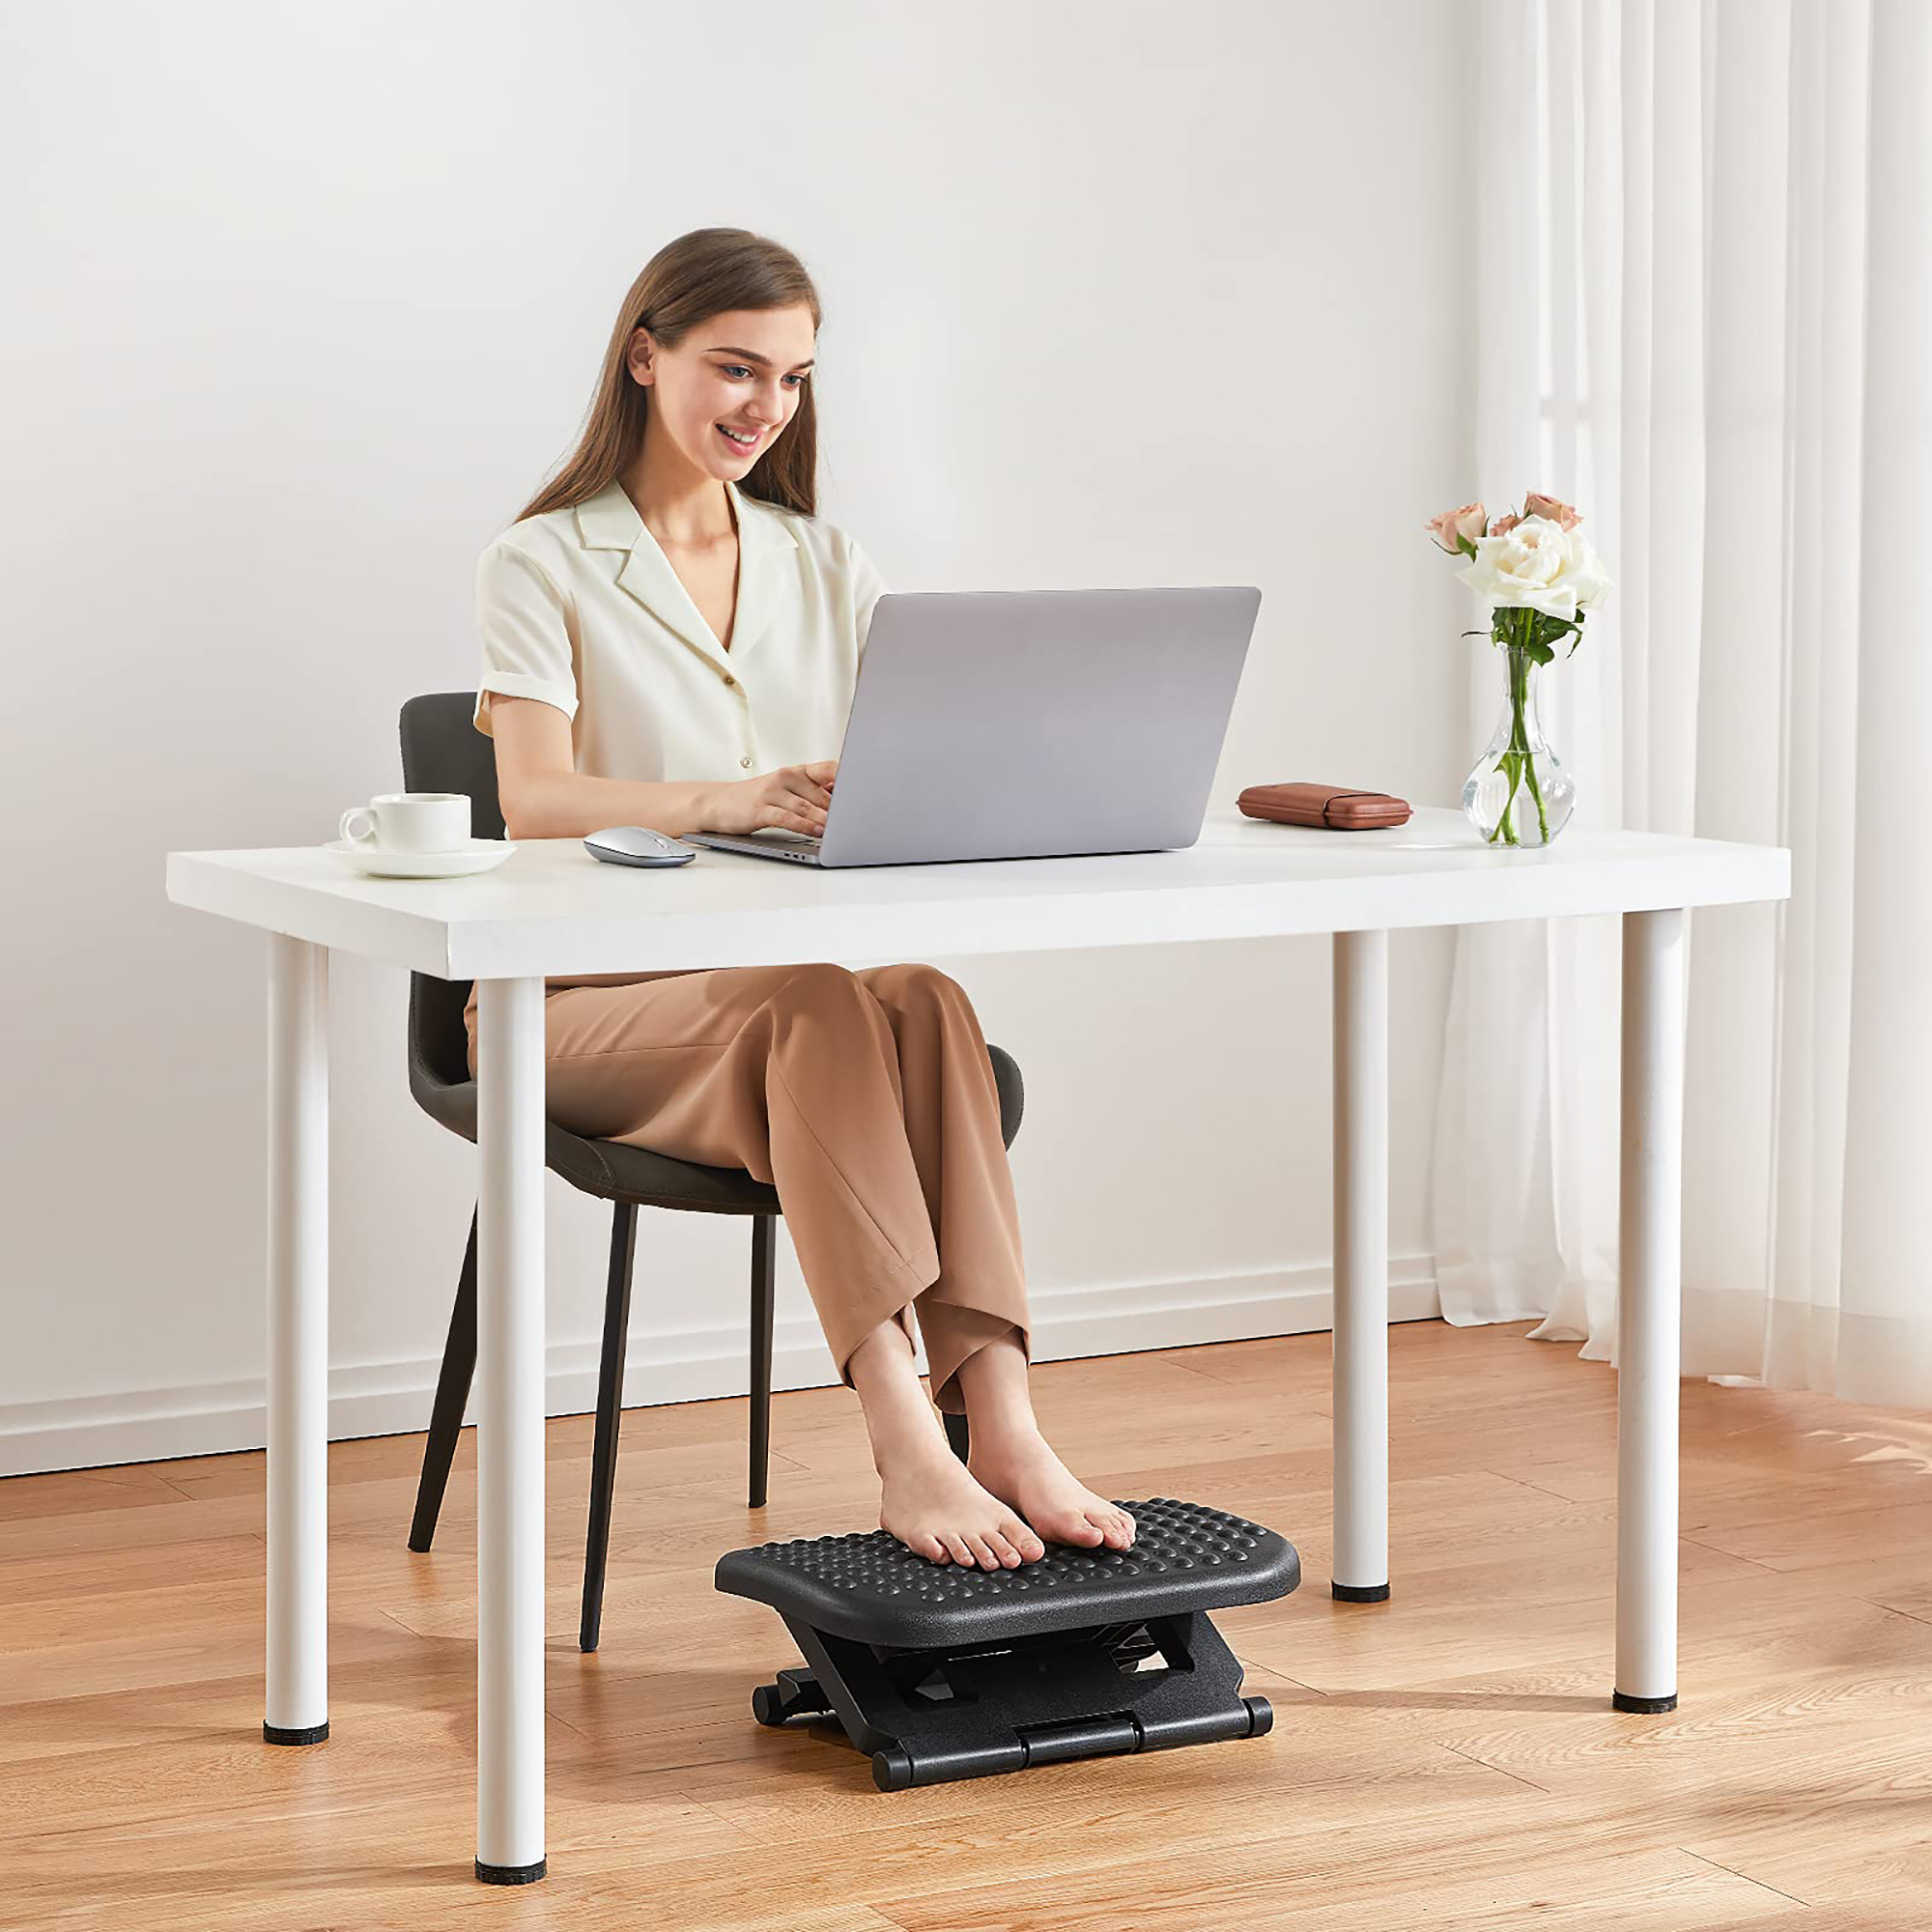 1pc Footrest Massager For Under Desk Use, Ergonomic Foot Rest With Massage  Surface, Suitable For Home Office Footstool